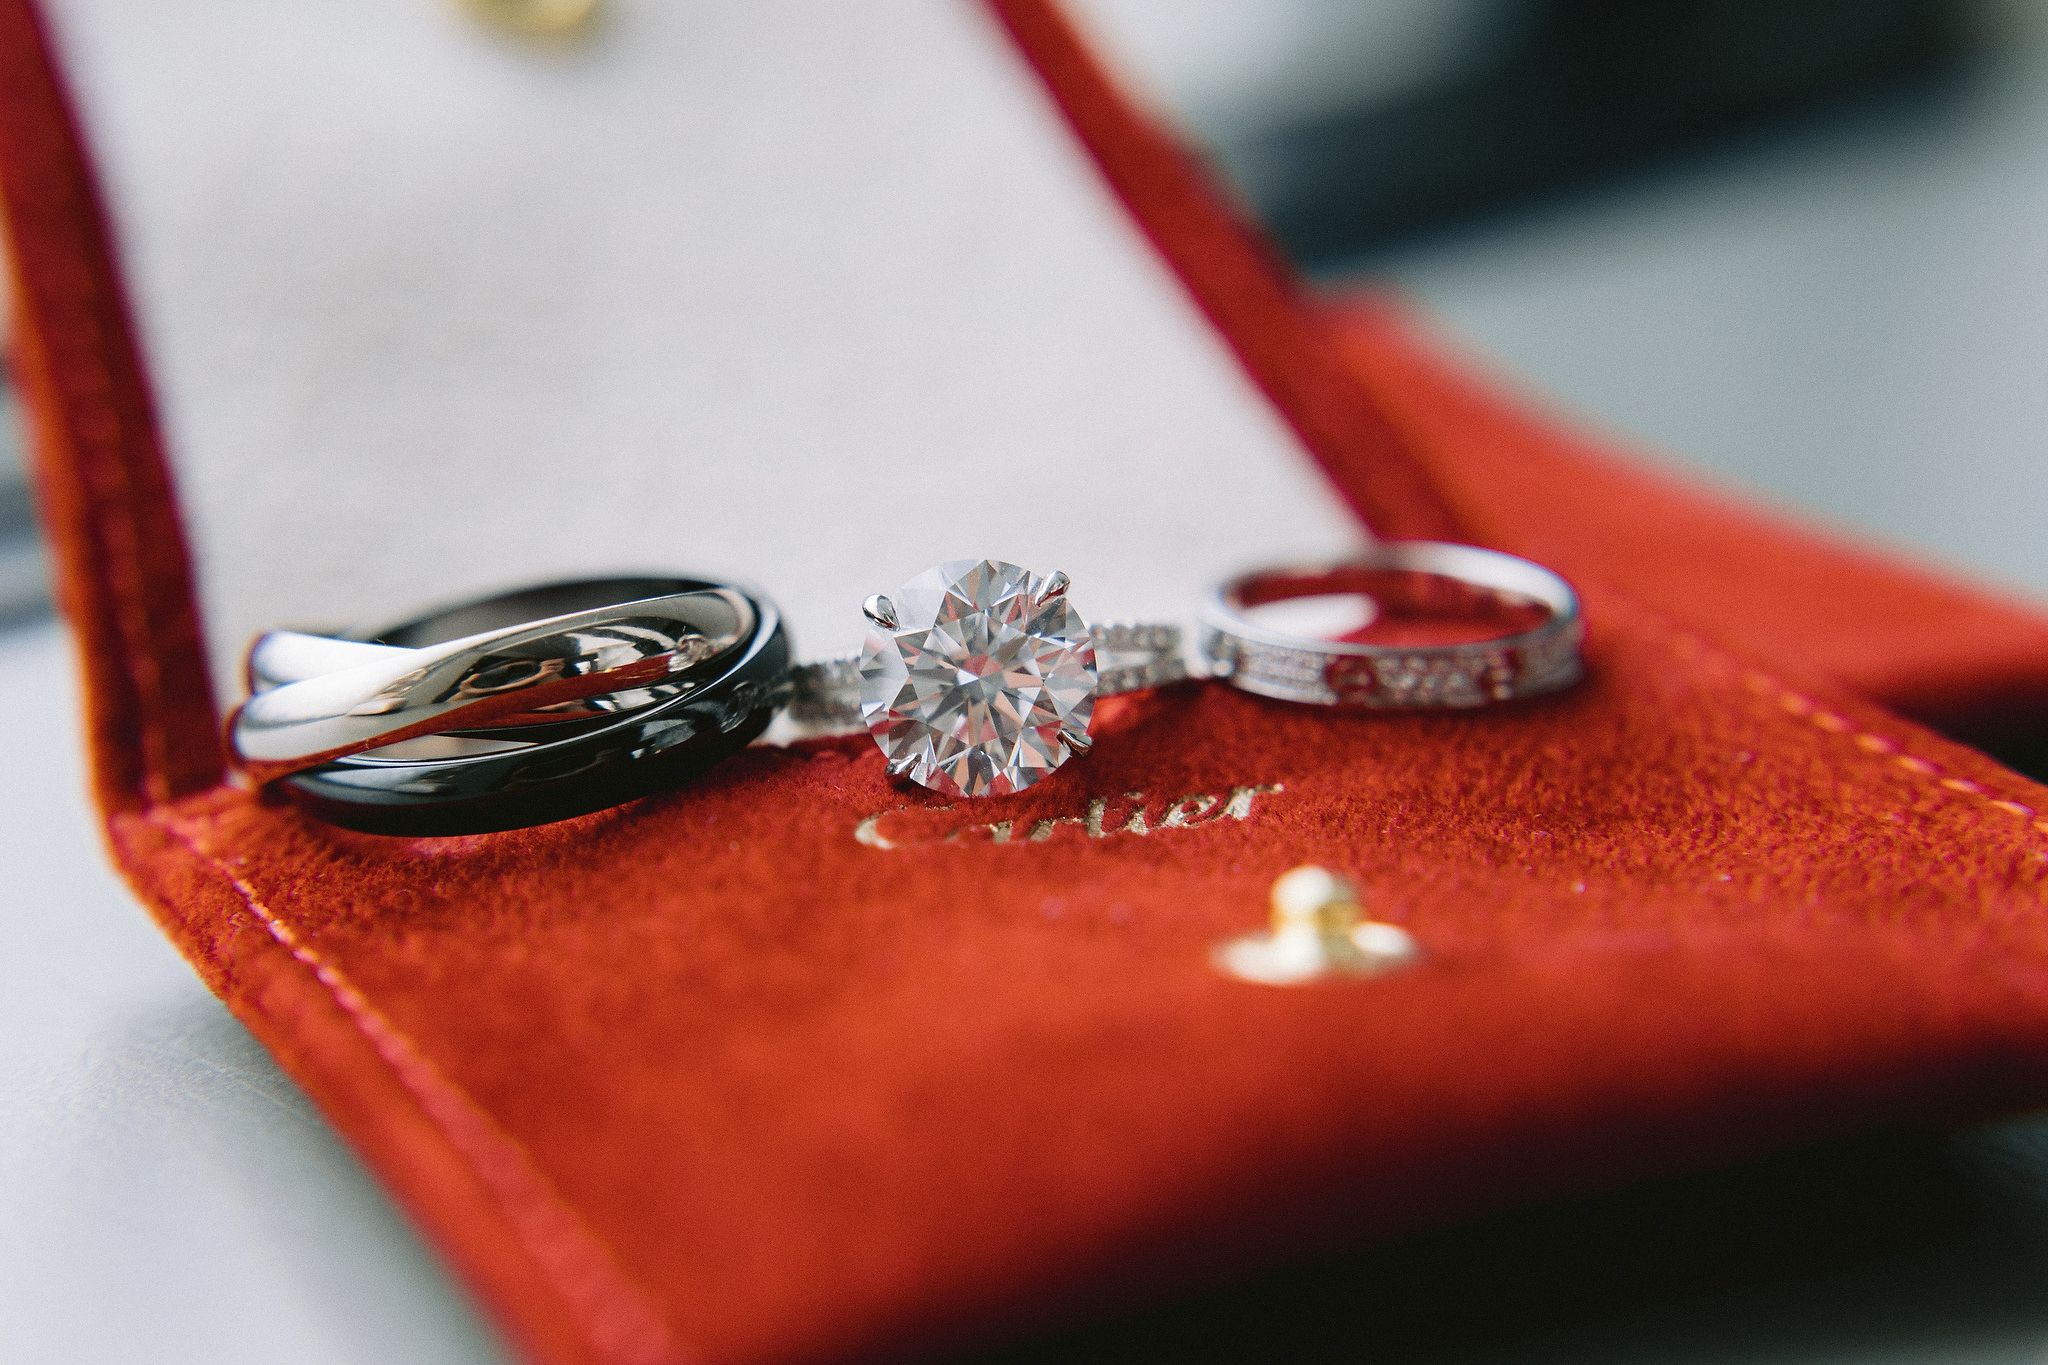 The diamond engagement ring and wedding bands are placed on top of a cartier velvet pouch. Image by Jenny Fu Studio